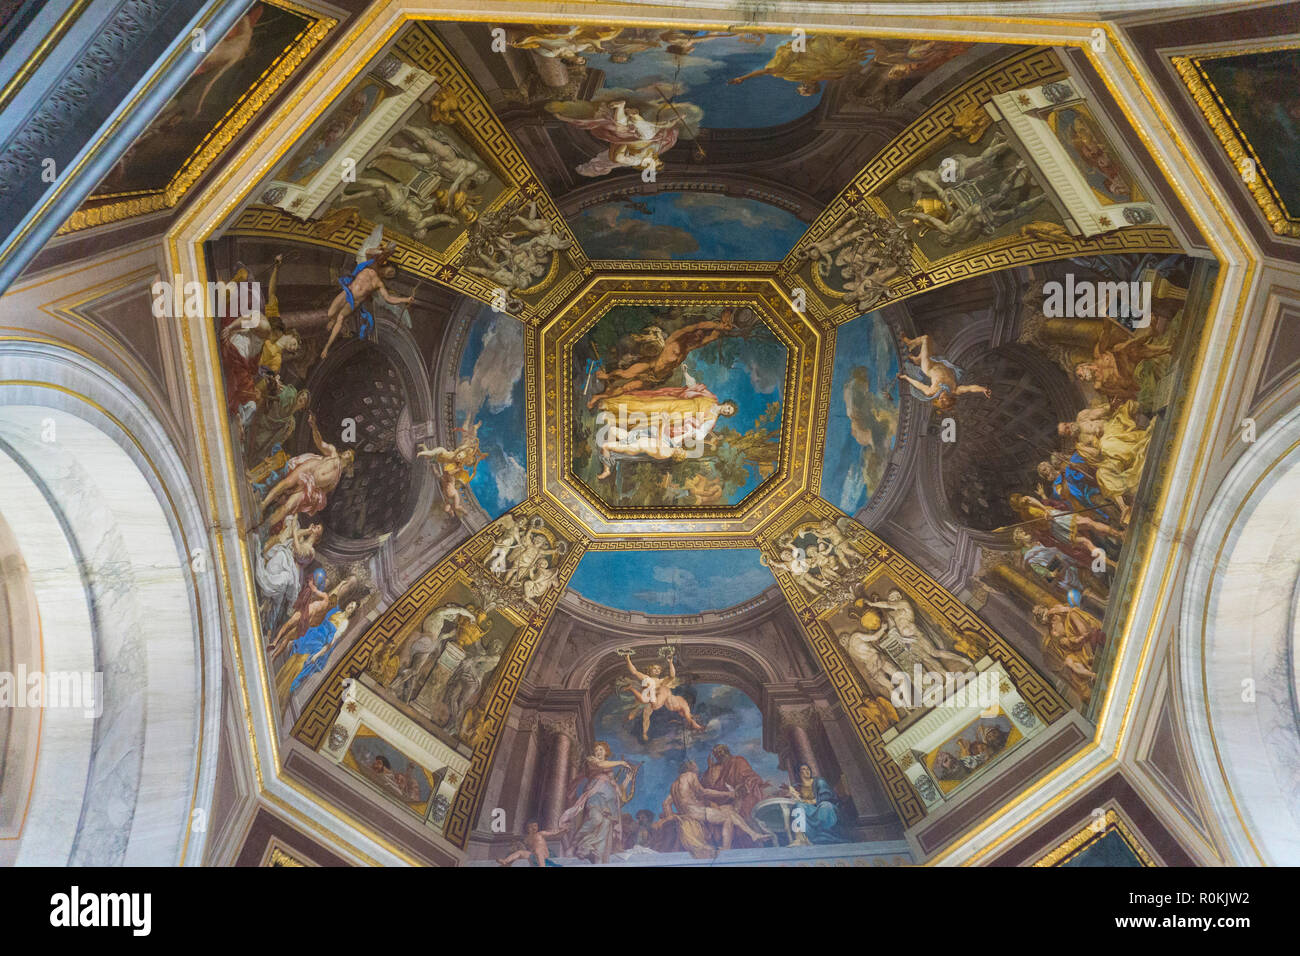 ROME, ITALY - June 21st 2018: Ornate classical paintings on the ceilings inside the Vatican Museum in Rome, Italy Stock Photo